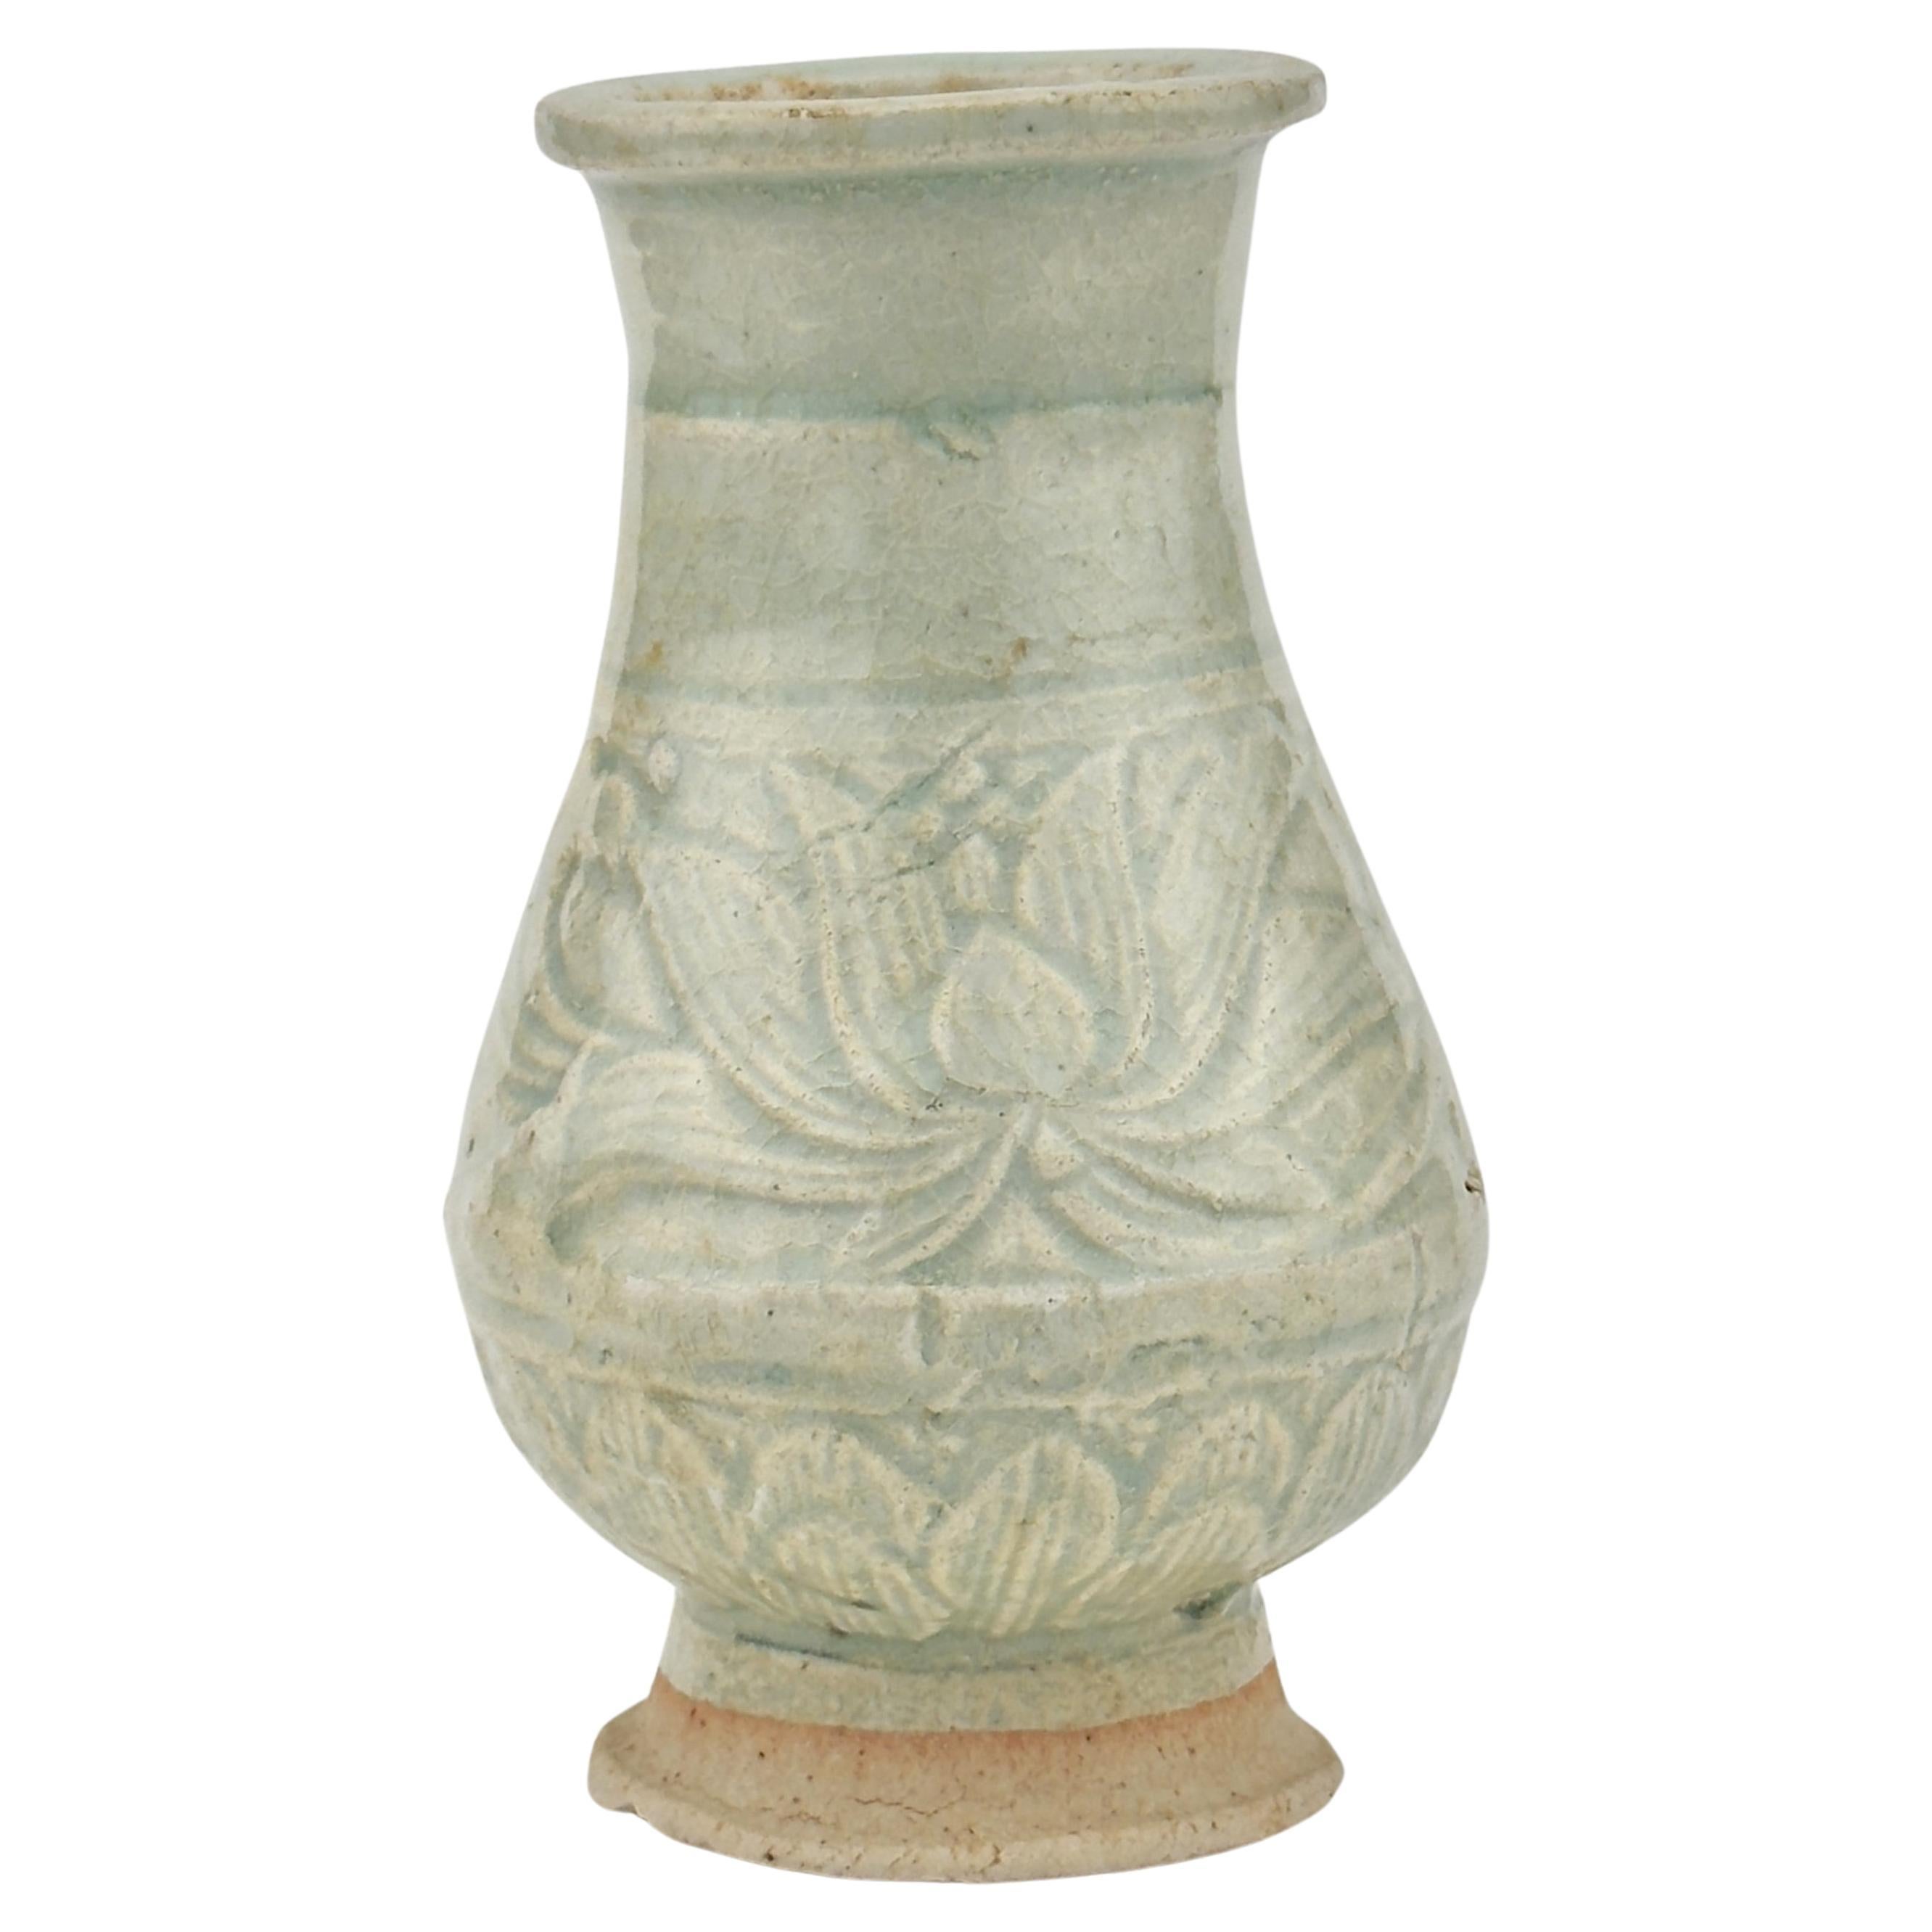 White Ware Moulded Baluster Form, Yuan Dynasty, 14th century